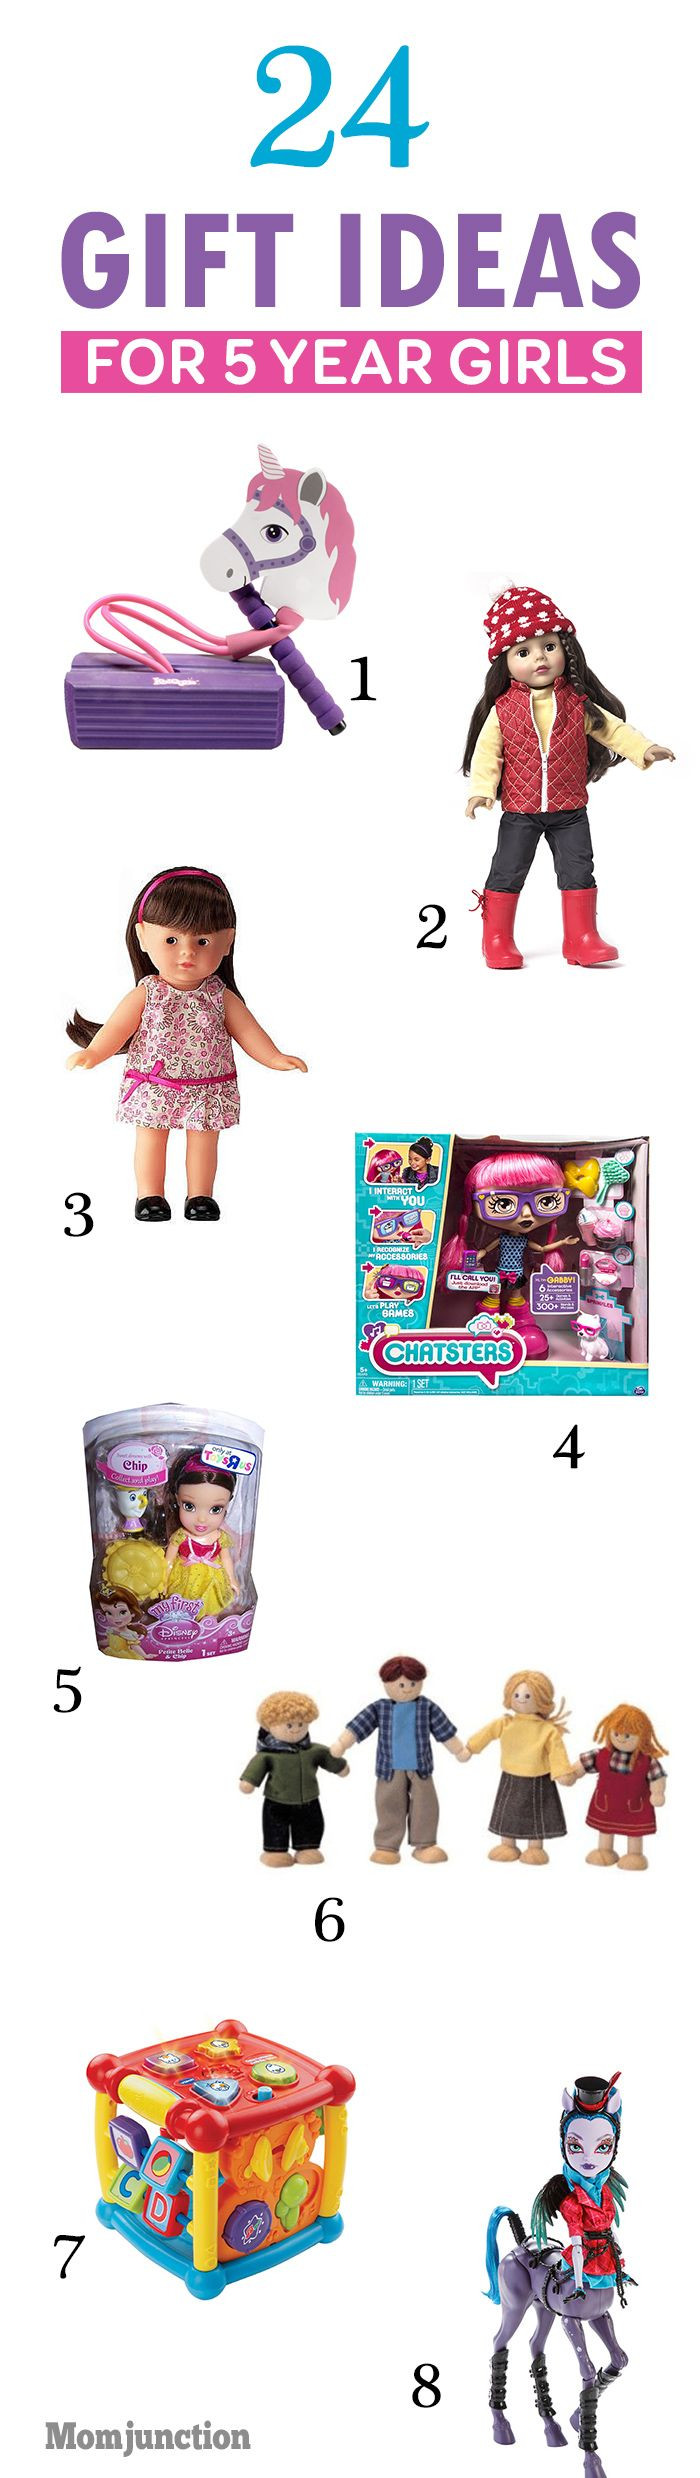 5 Year Old Christmas Gift Ideas
 29 best Best Gifts for 6 Year Old Girls images on